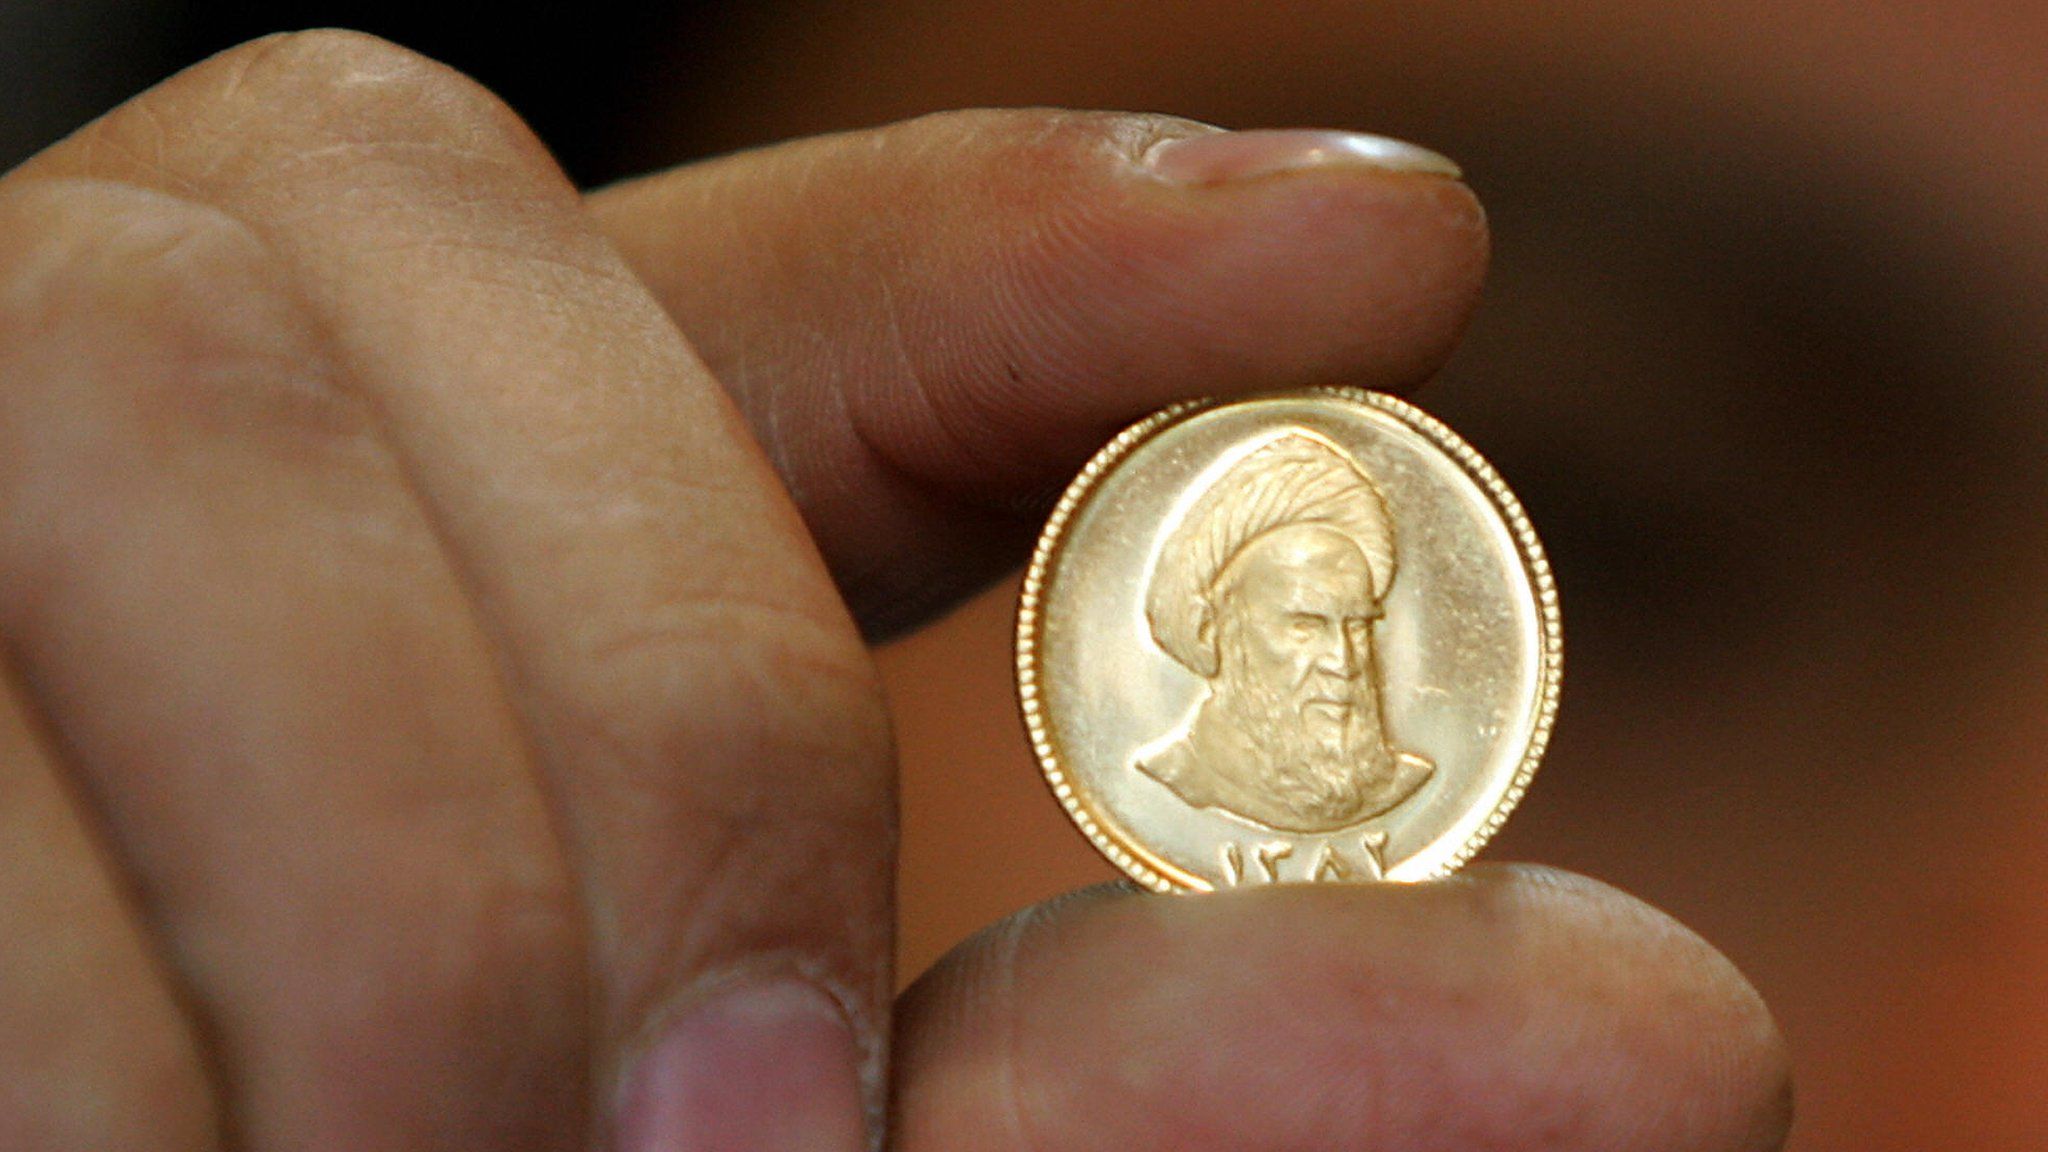 File photo showing an Iranian gold trader holding a gold coin in Tehran (19 April 2006)